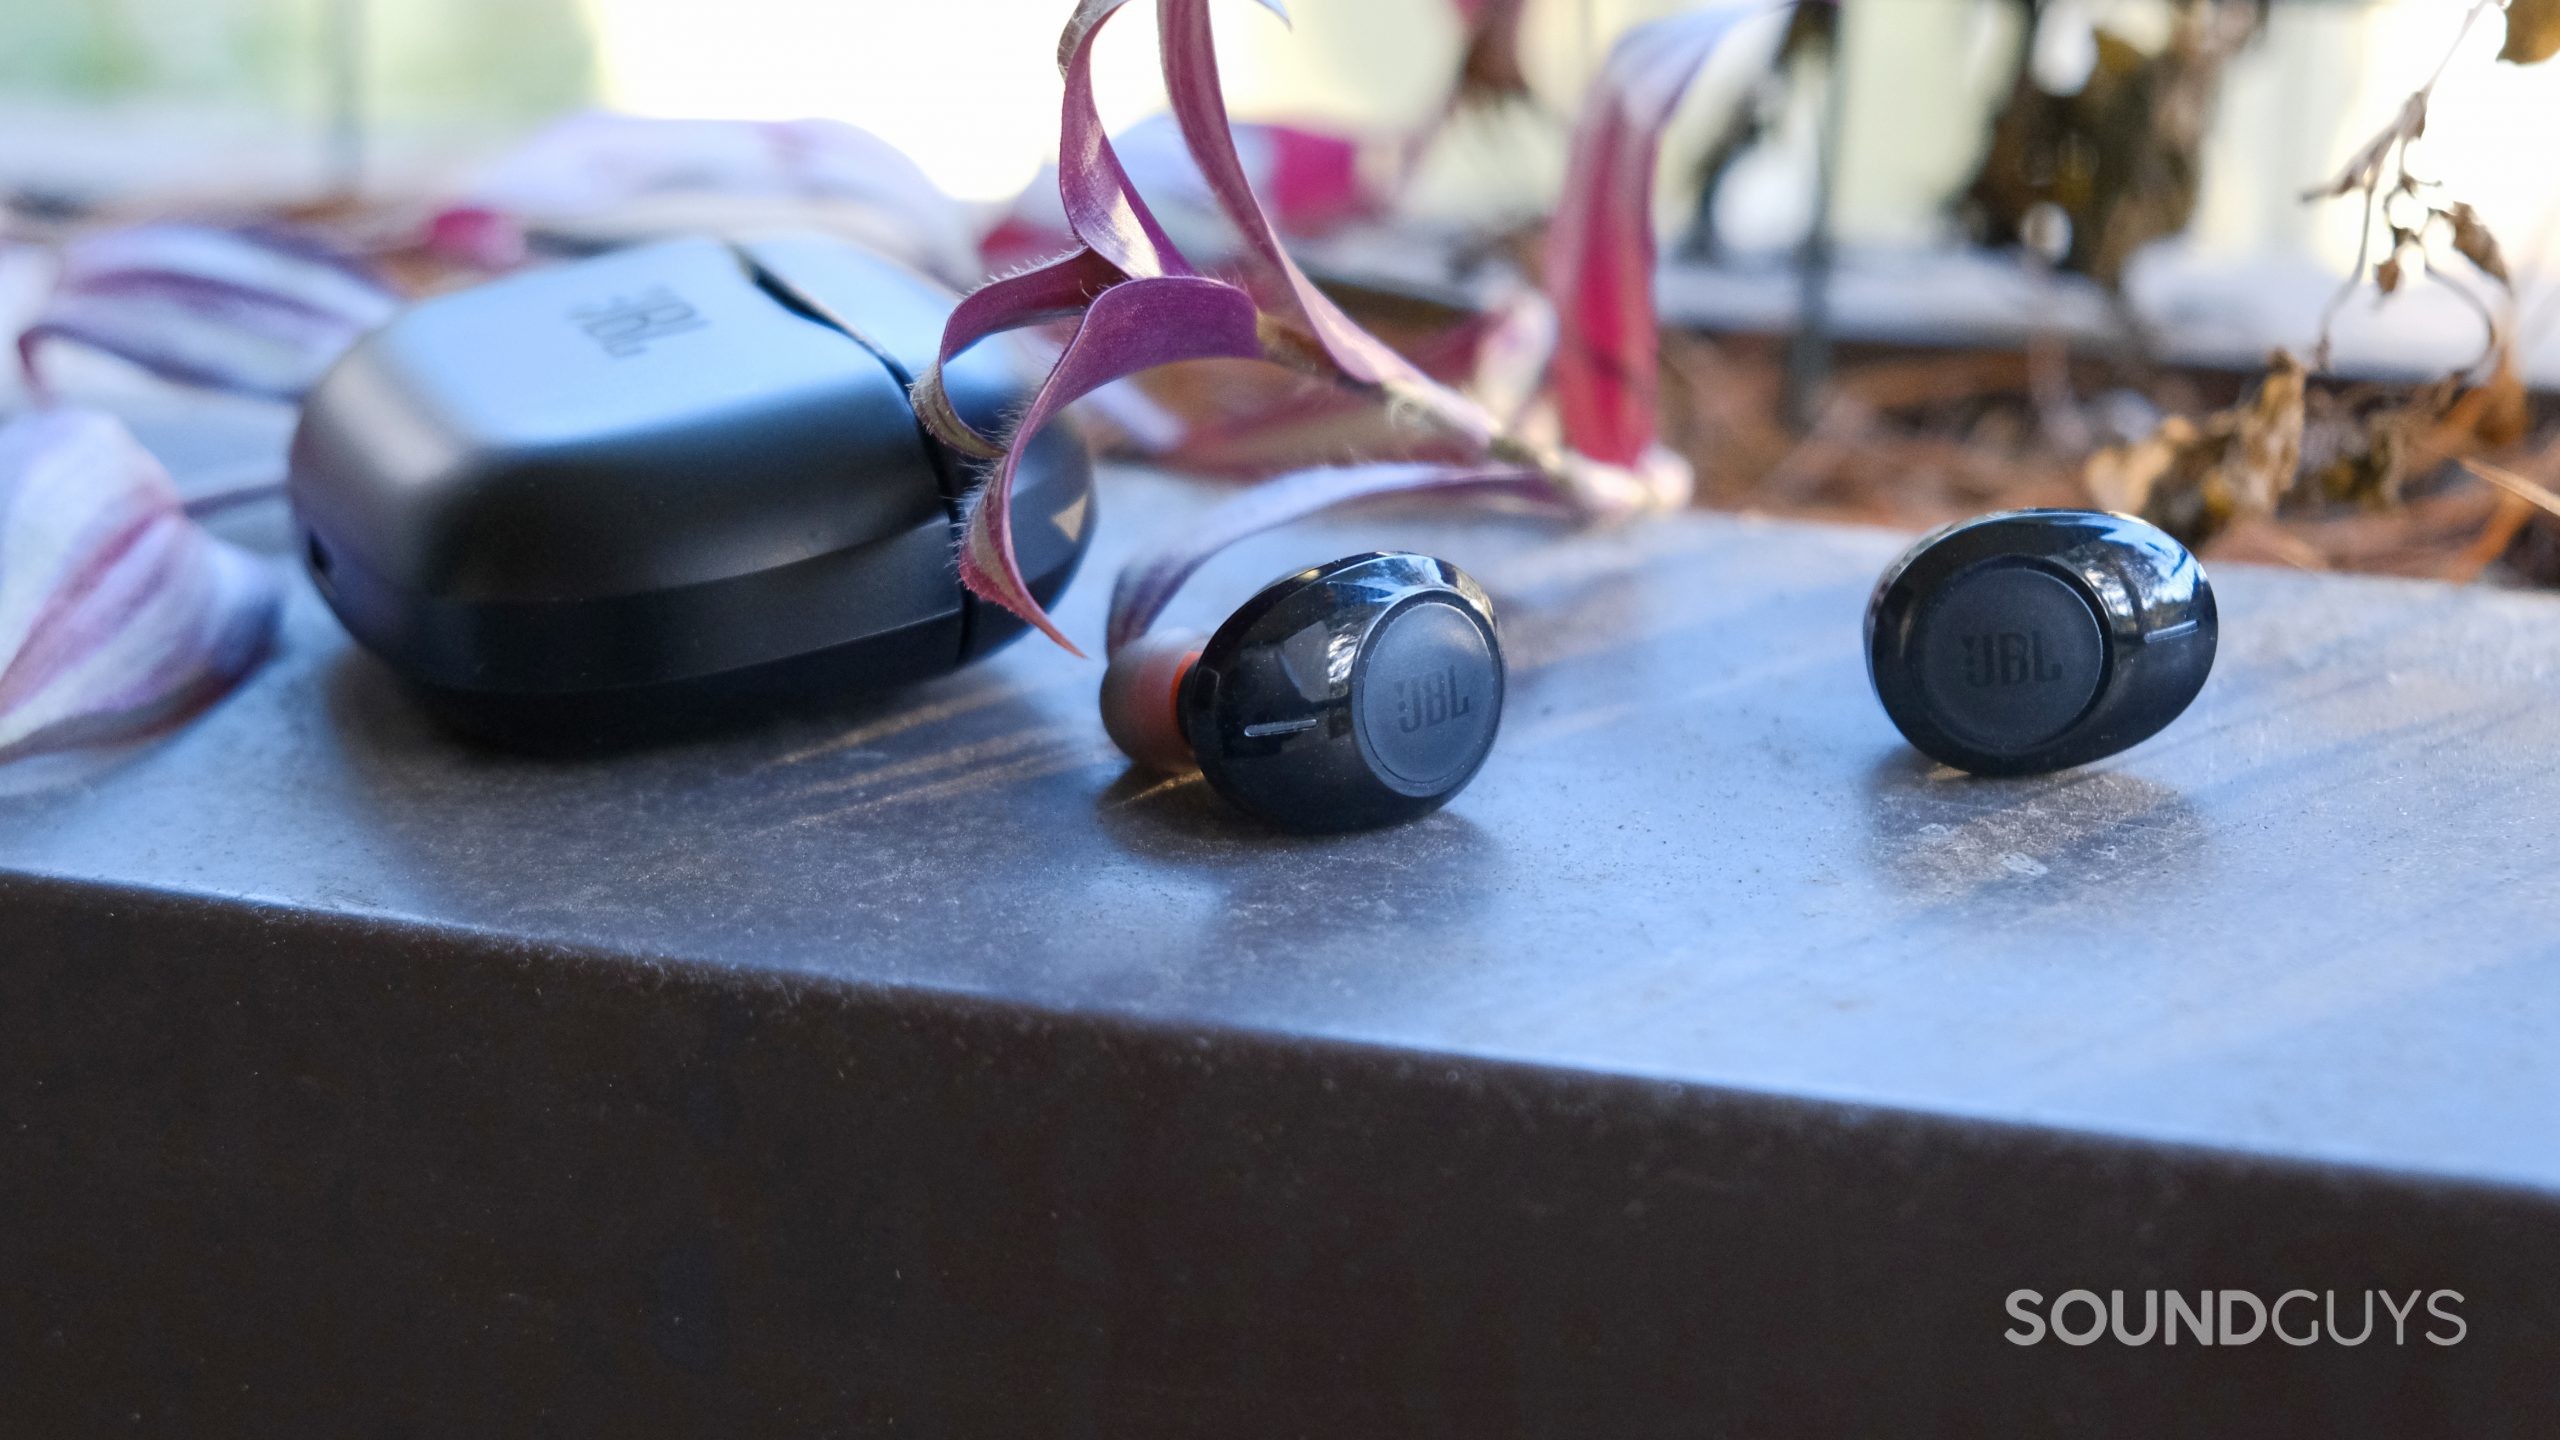 The JBL Tune 125TWS earbuds rest on a ledge with the case.